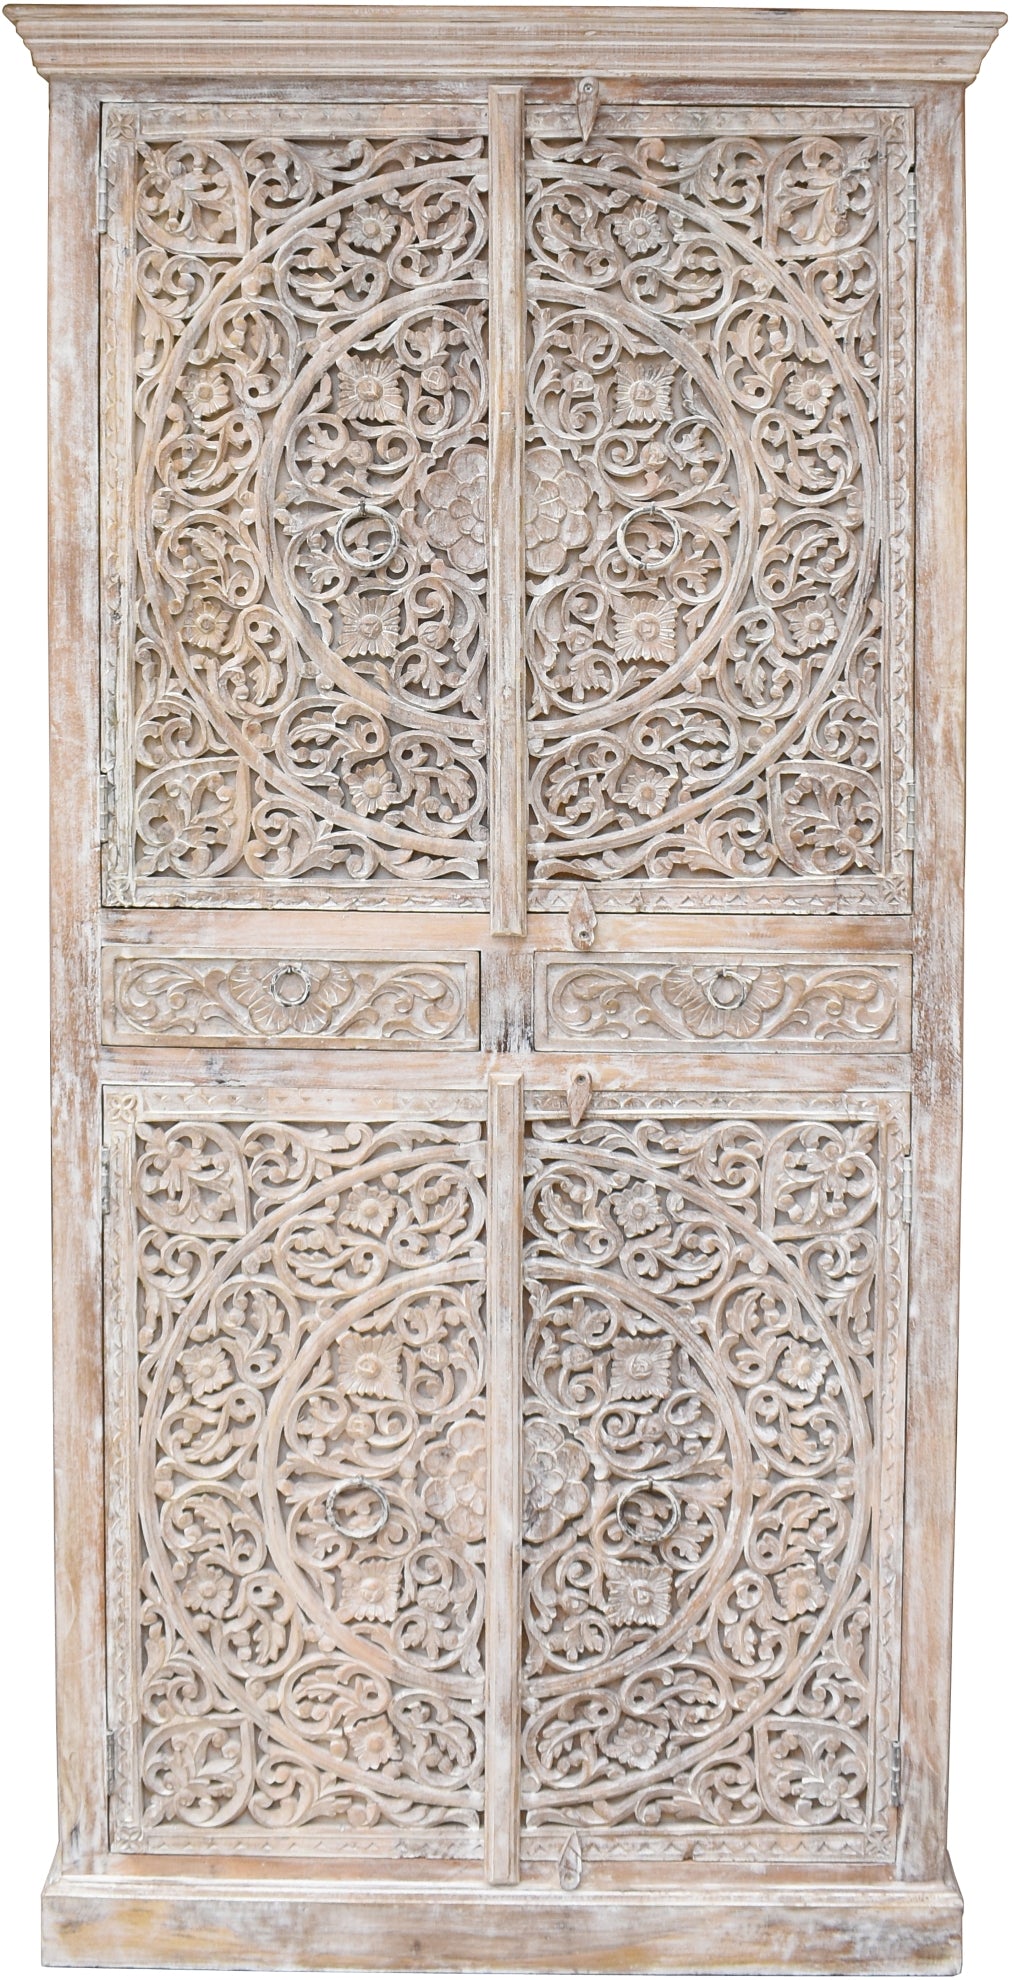 Colin_Solid Indian Wood Hand Carved Cupboard_Height 190 cm